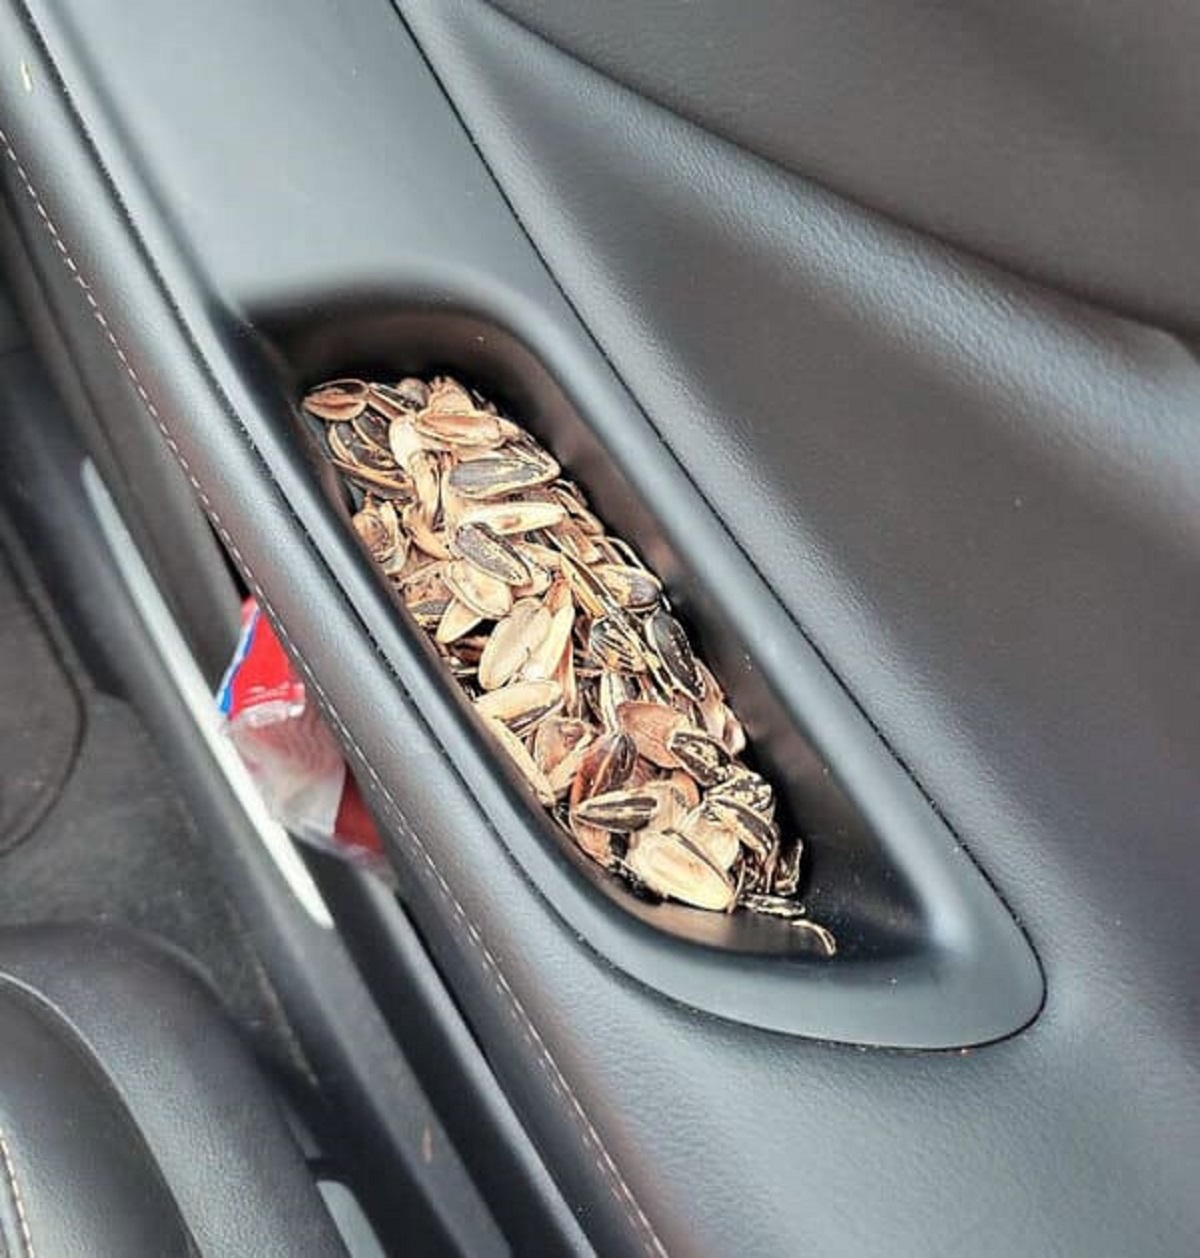 “My Wife Spits Her Seed Shells Into The Door Handle Of Our Car And Leaves It There”